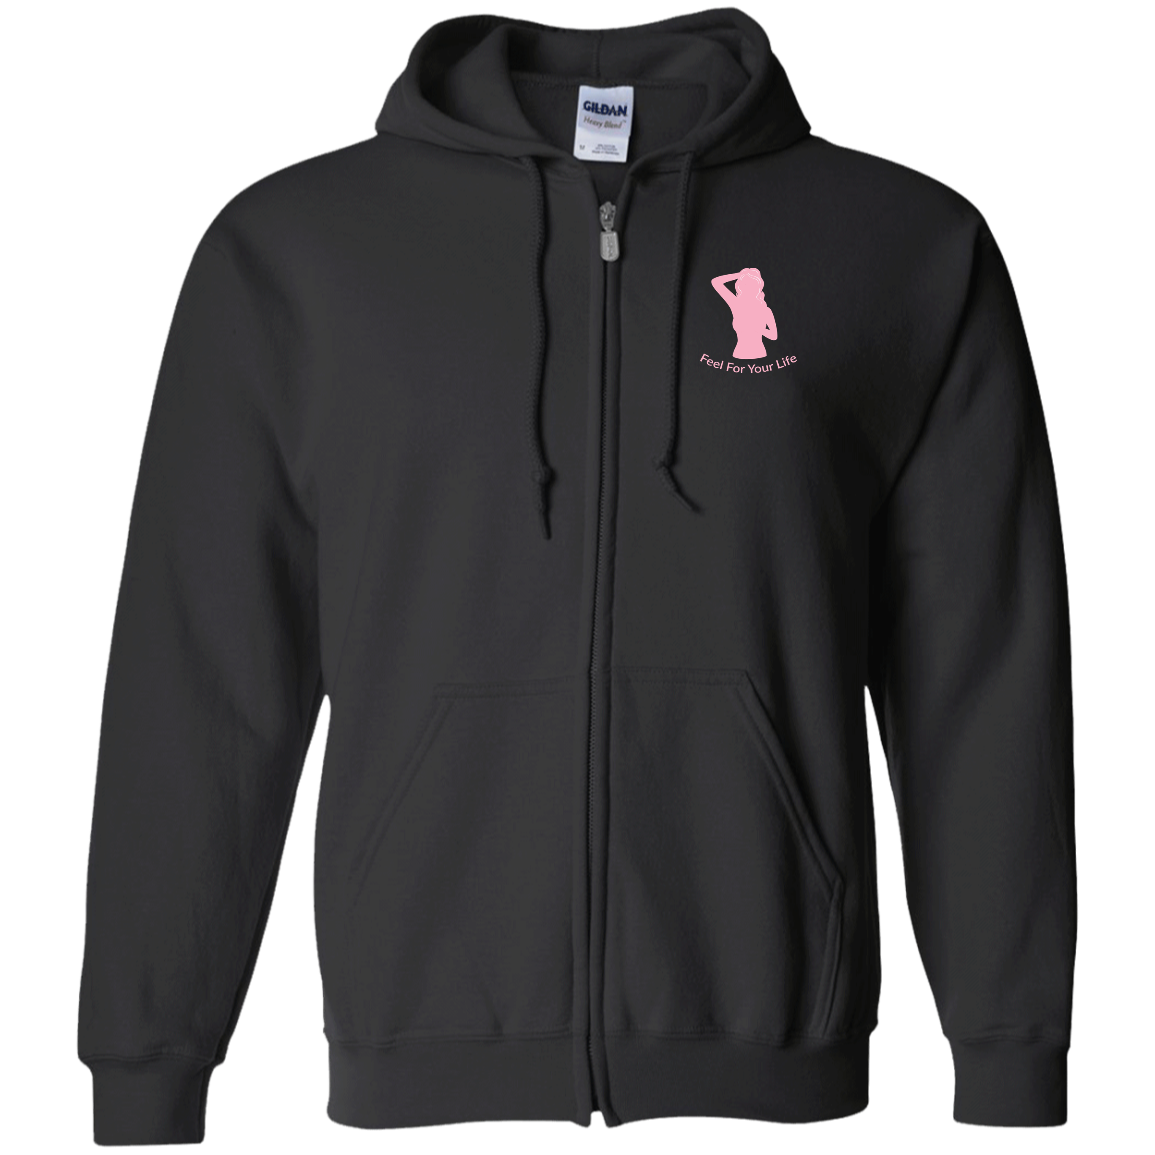 Feel For Your Life Zip Up Hoodie Black